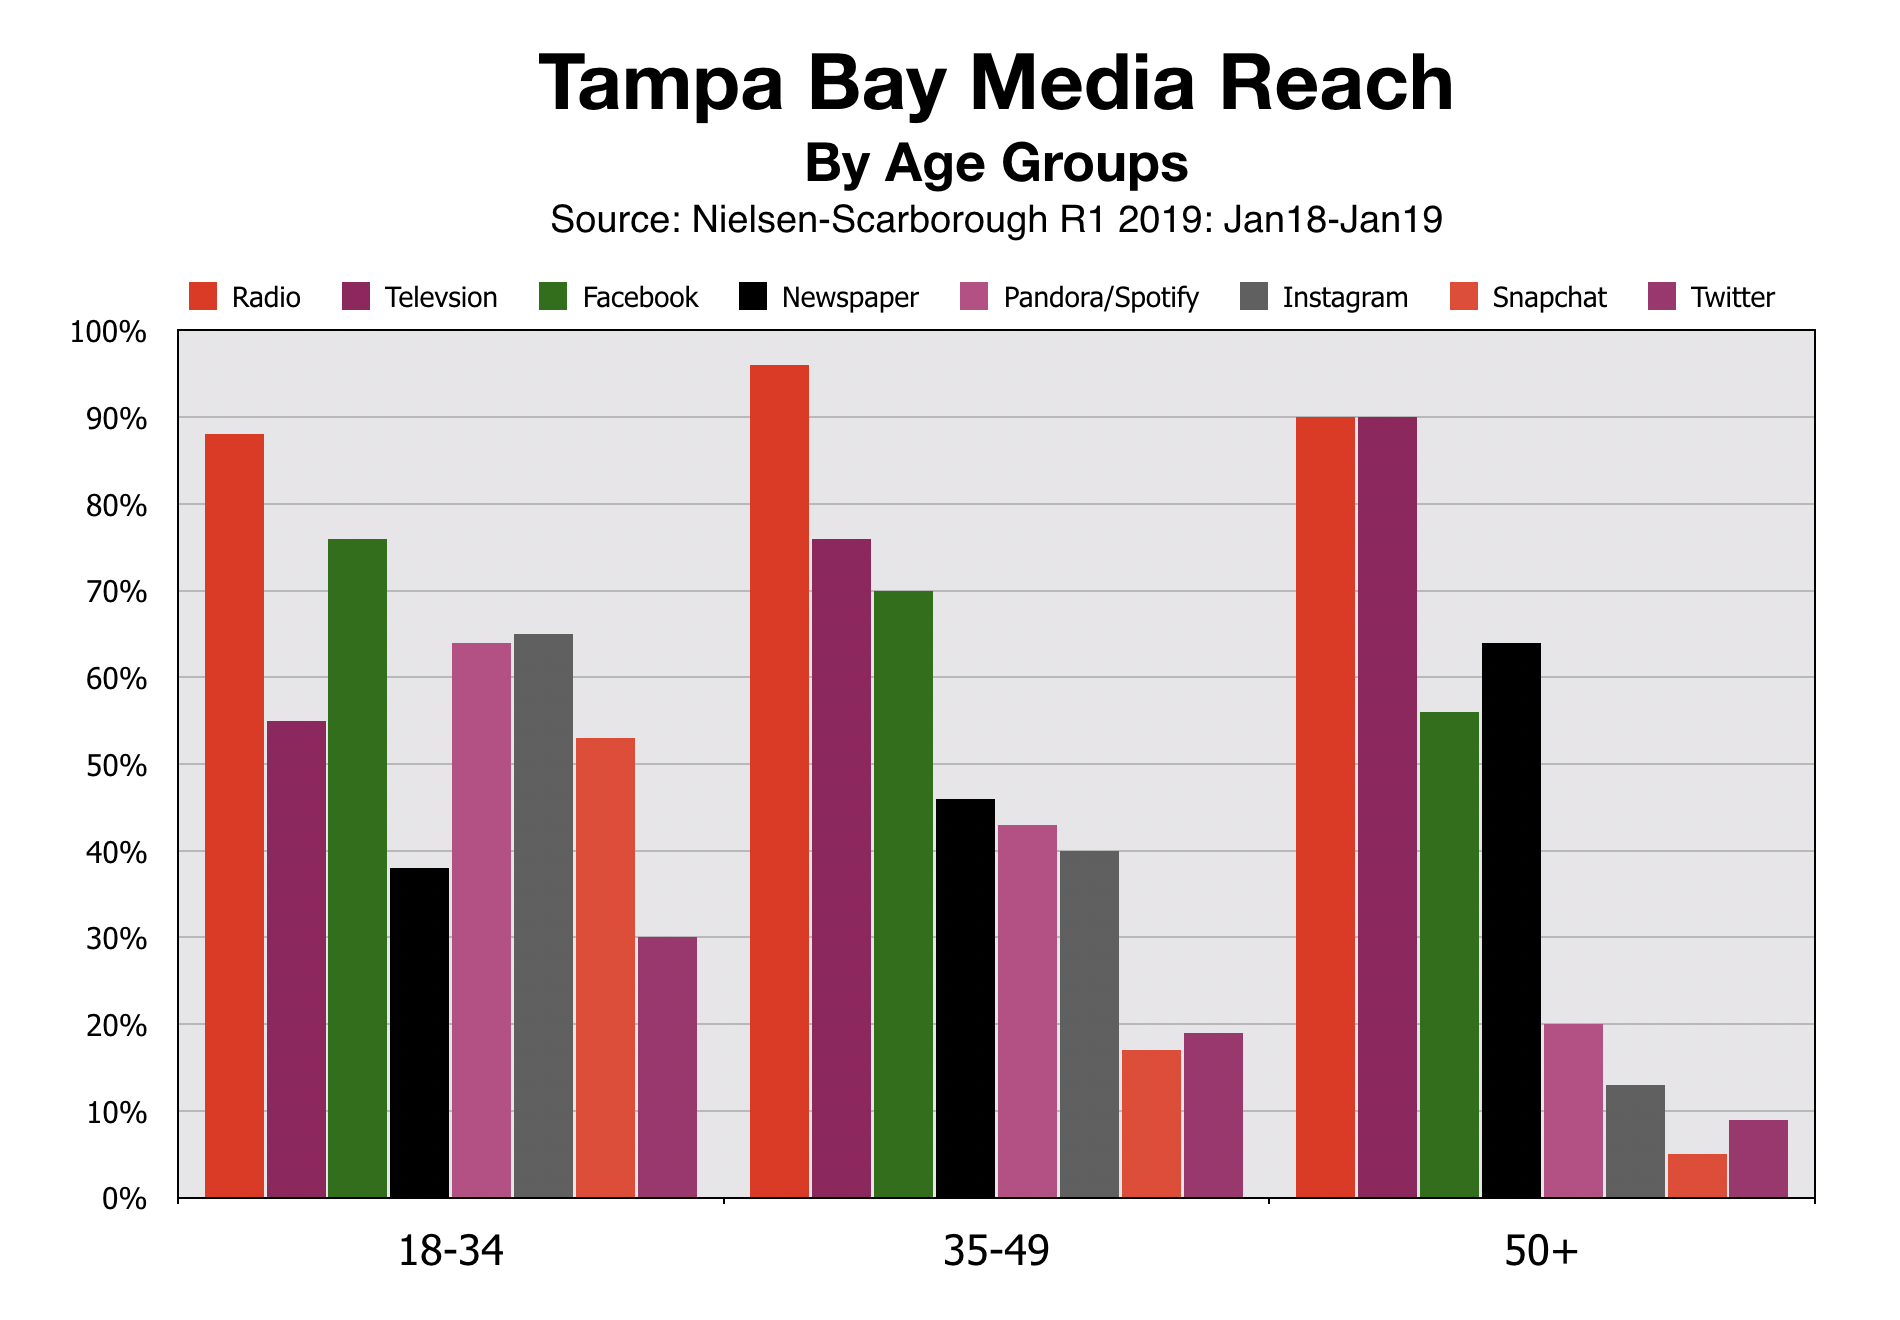 Tampa Bay Media Reach By Age Demographics